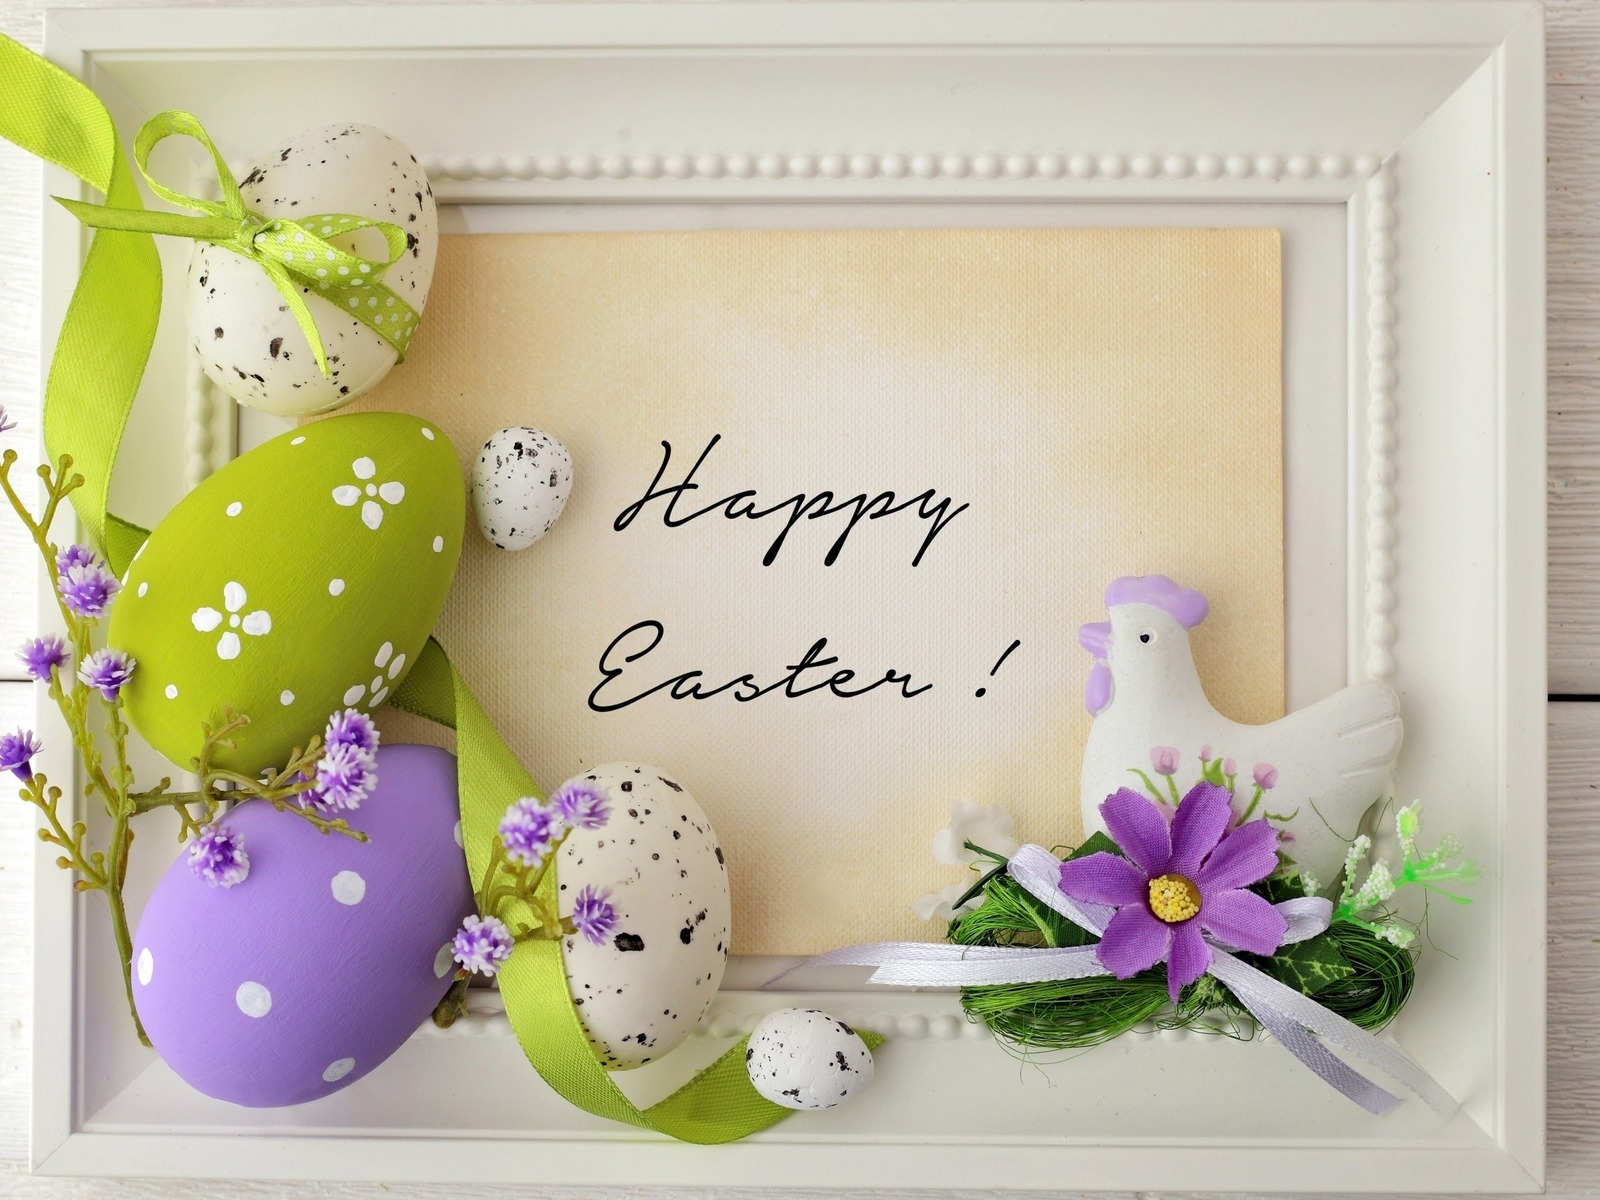 Happy Easter 2015 for 1600 x 1200 resolution